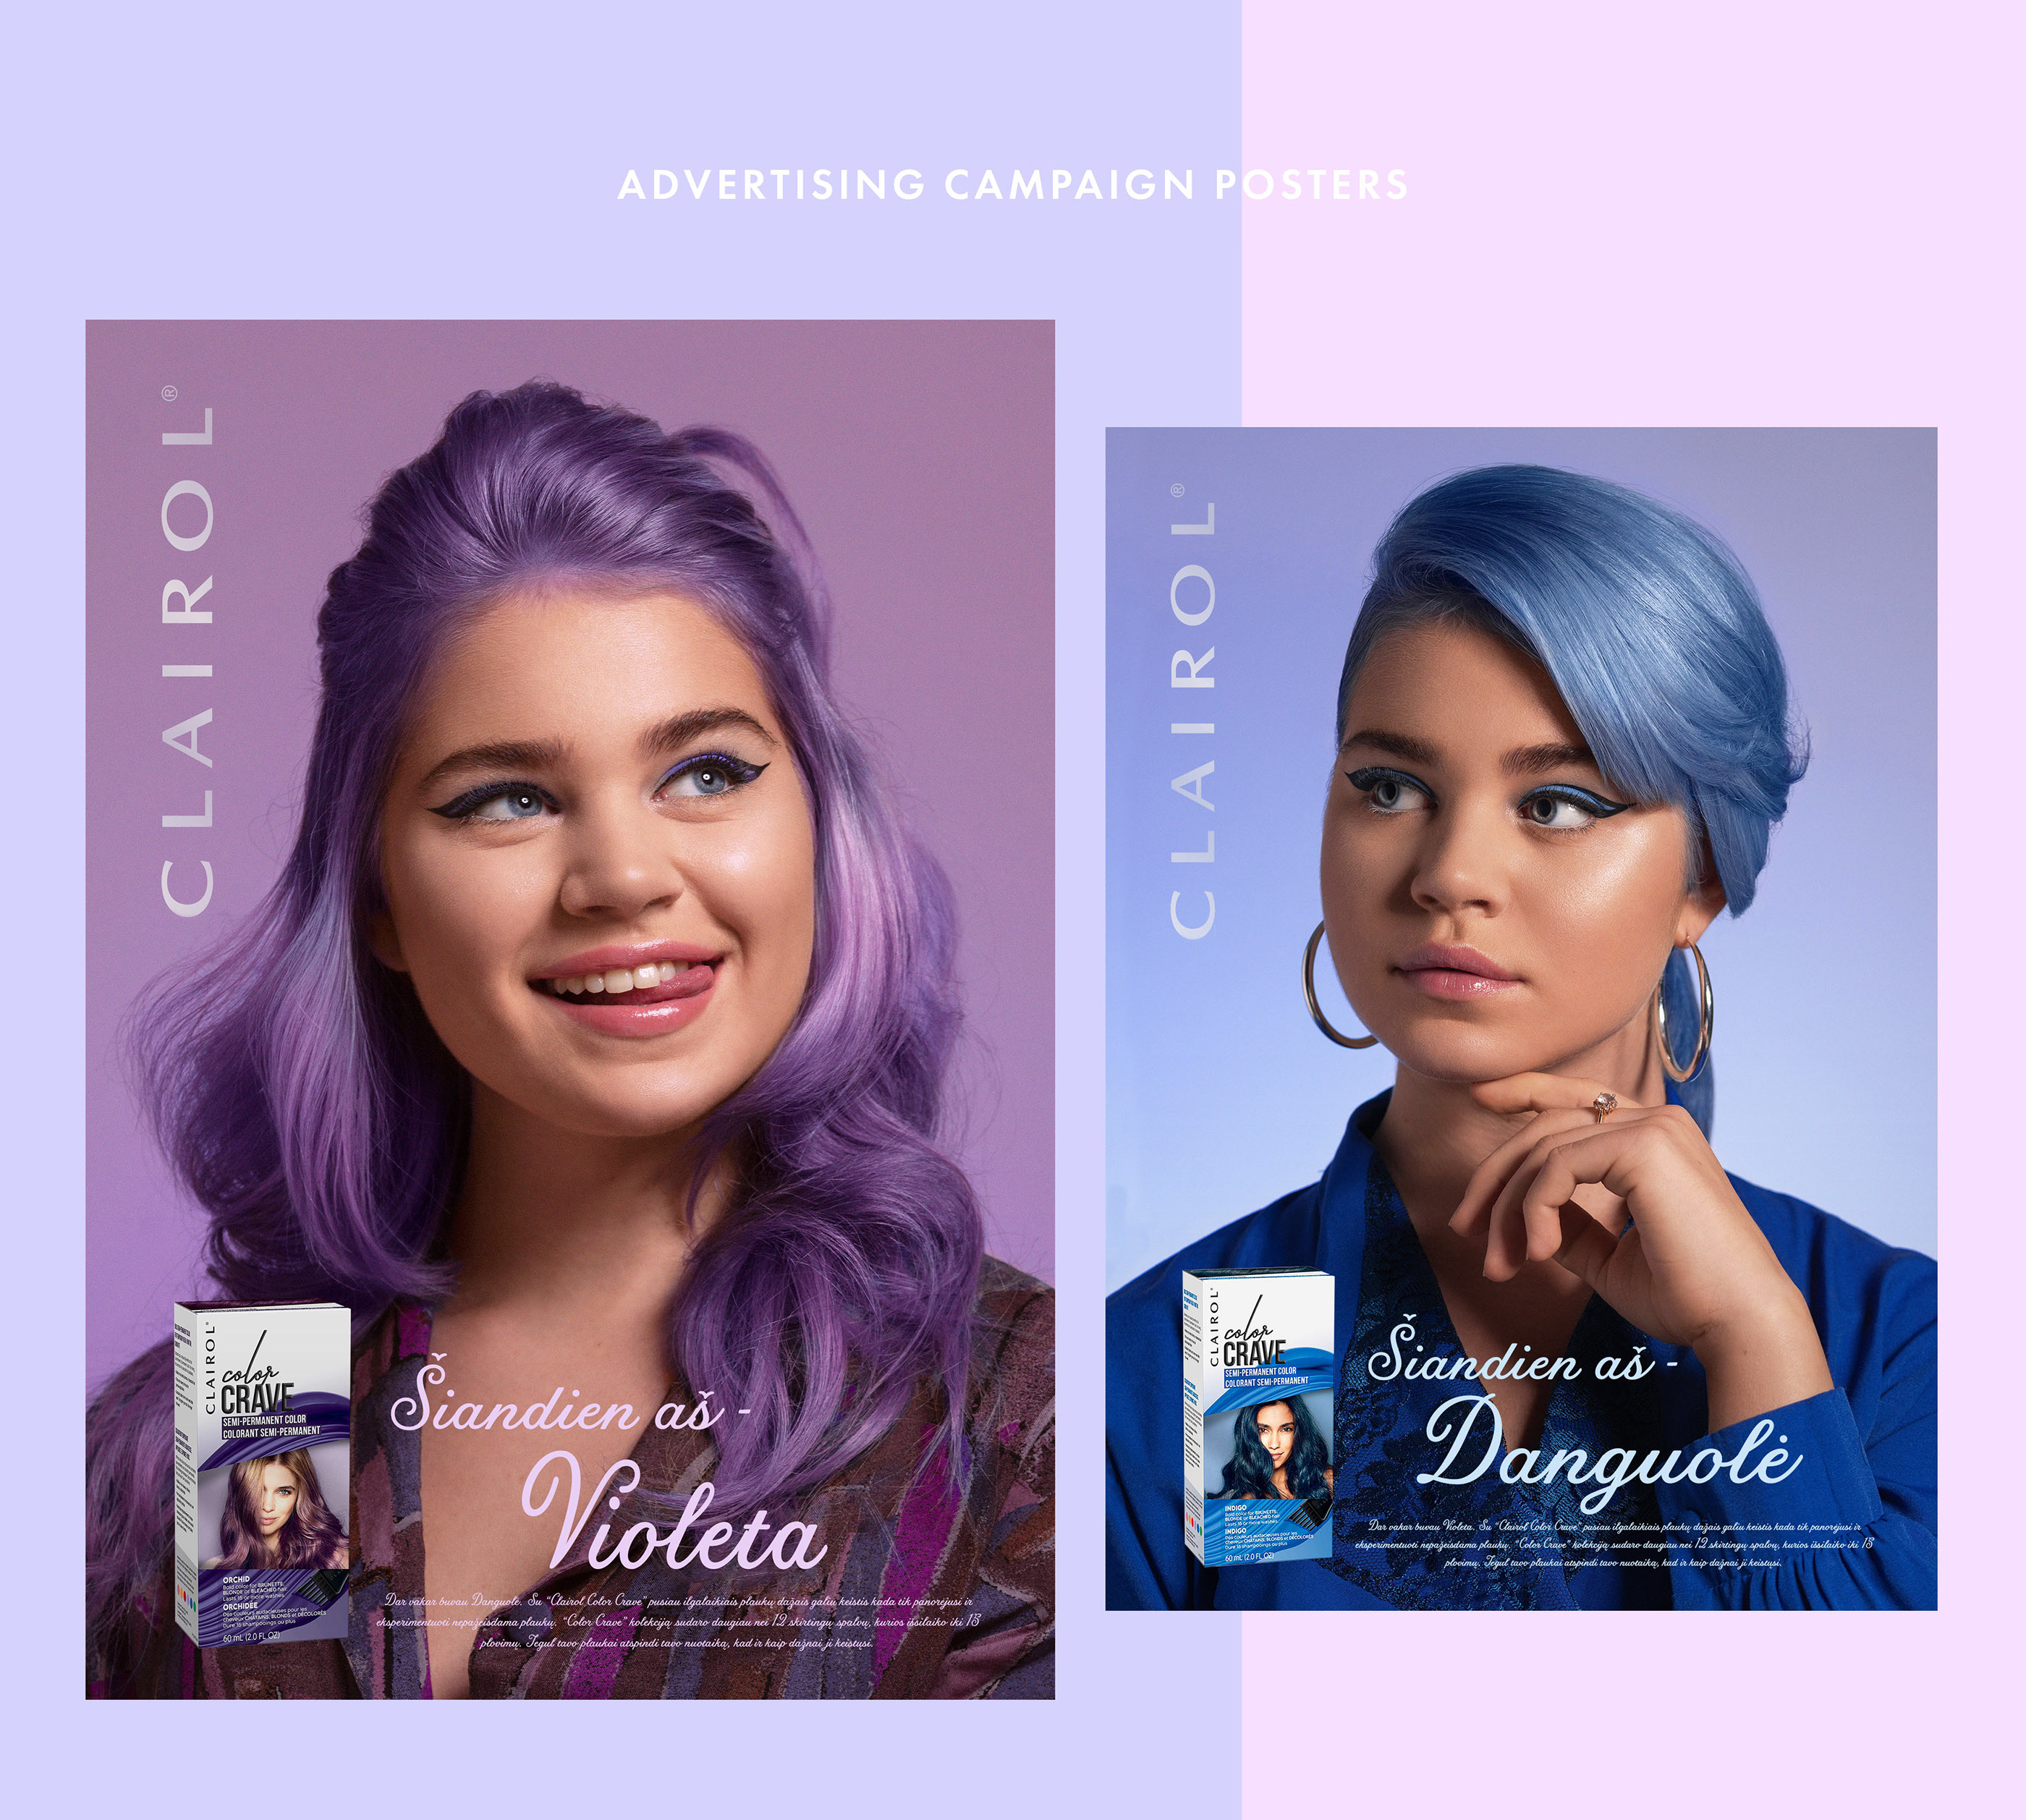 CLAIROL hair dye advertising campaign on Behance